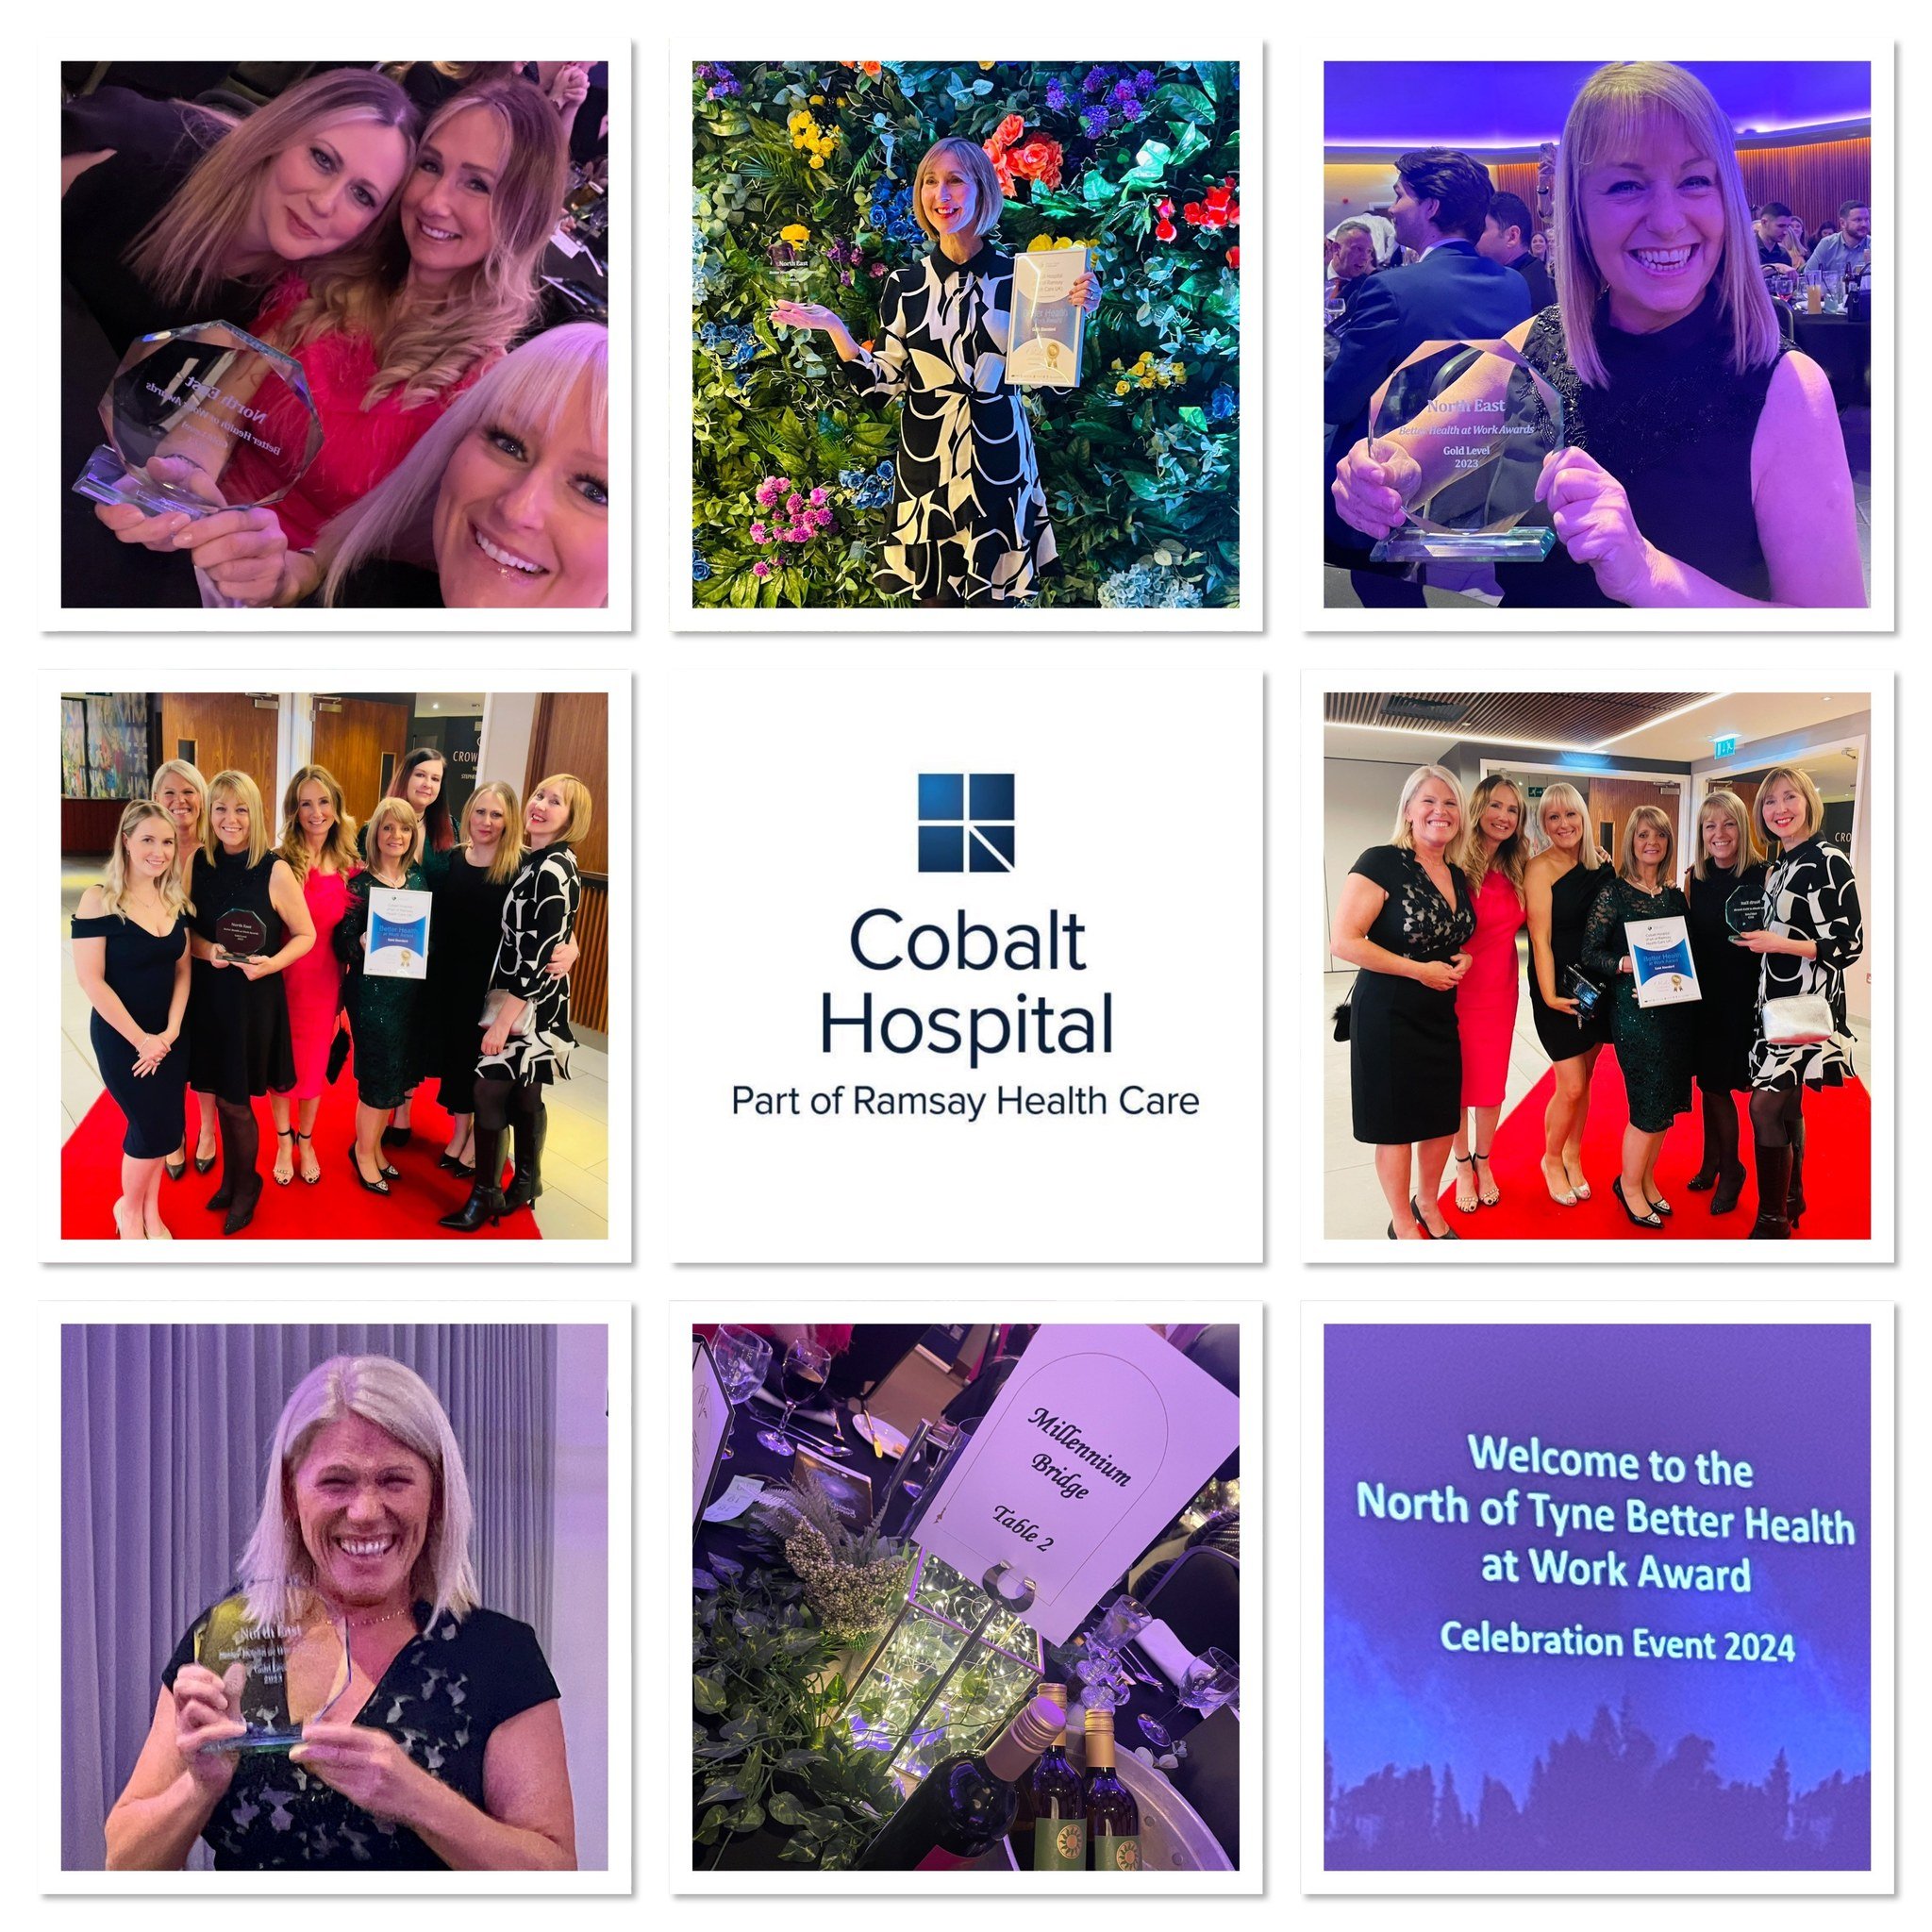 Cobalt Achieves GOLD at the Better Health at Work Awards